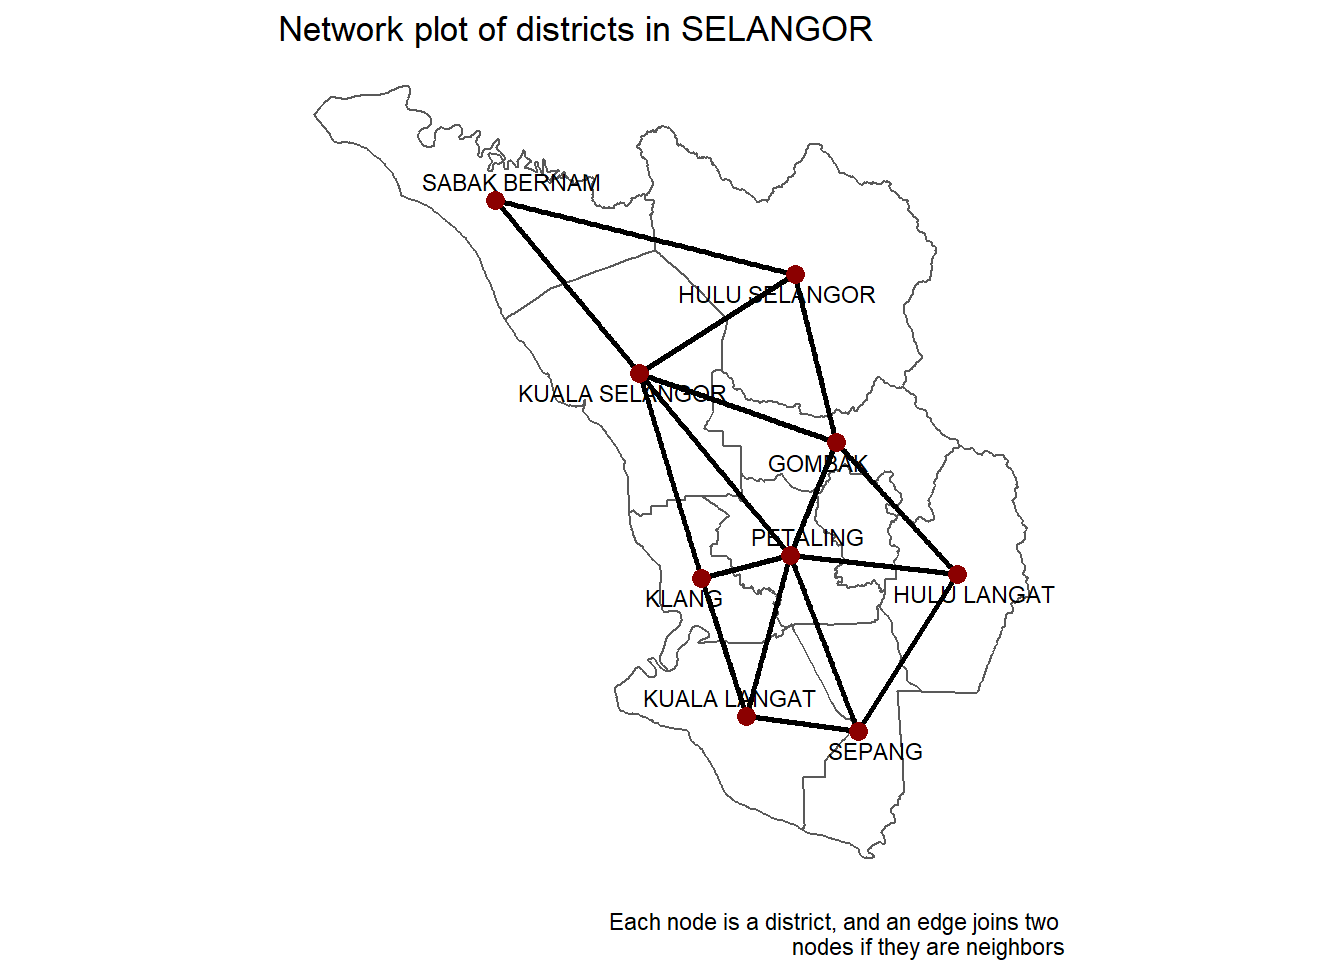 SELANGOR district network on map